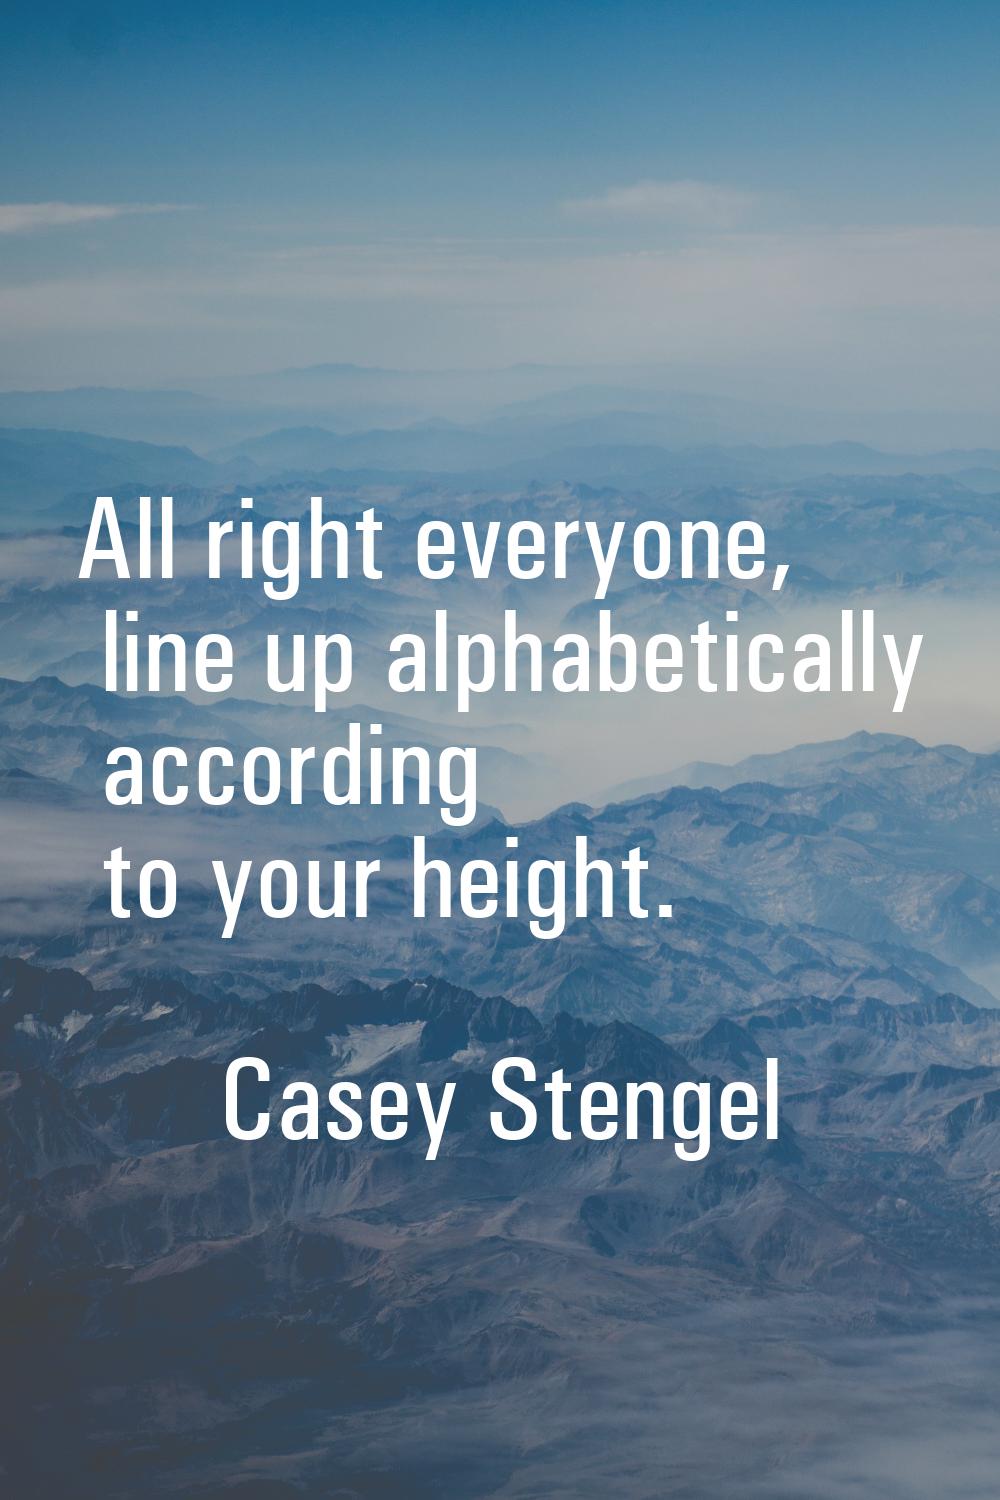 All right everyone, line up alphabetically according to your height.